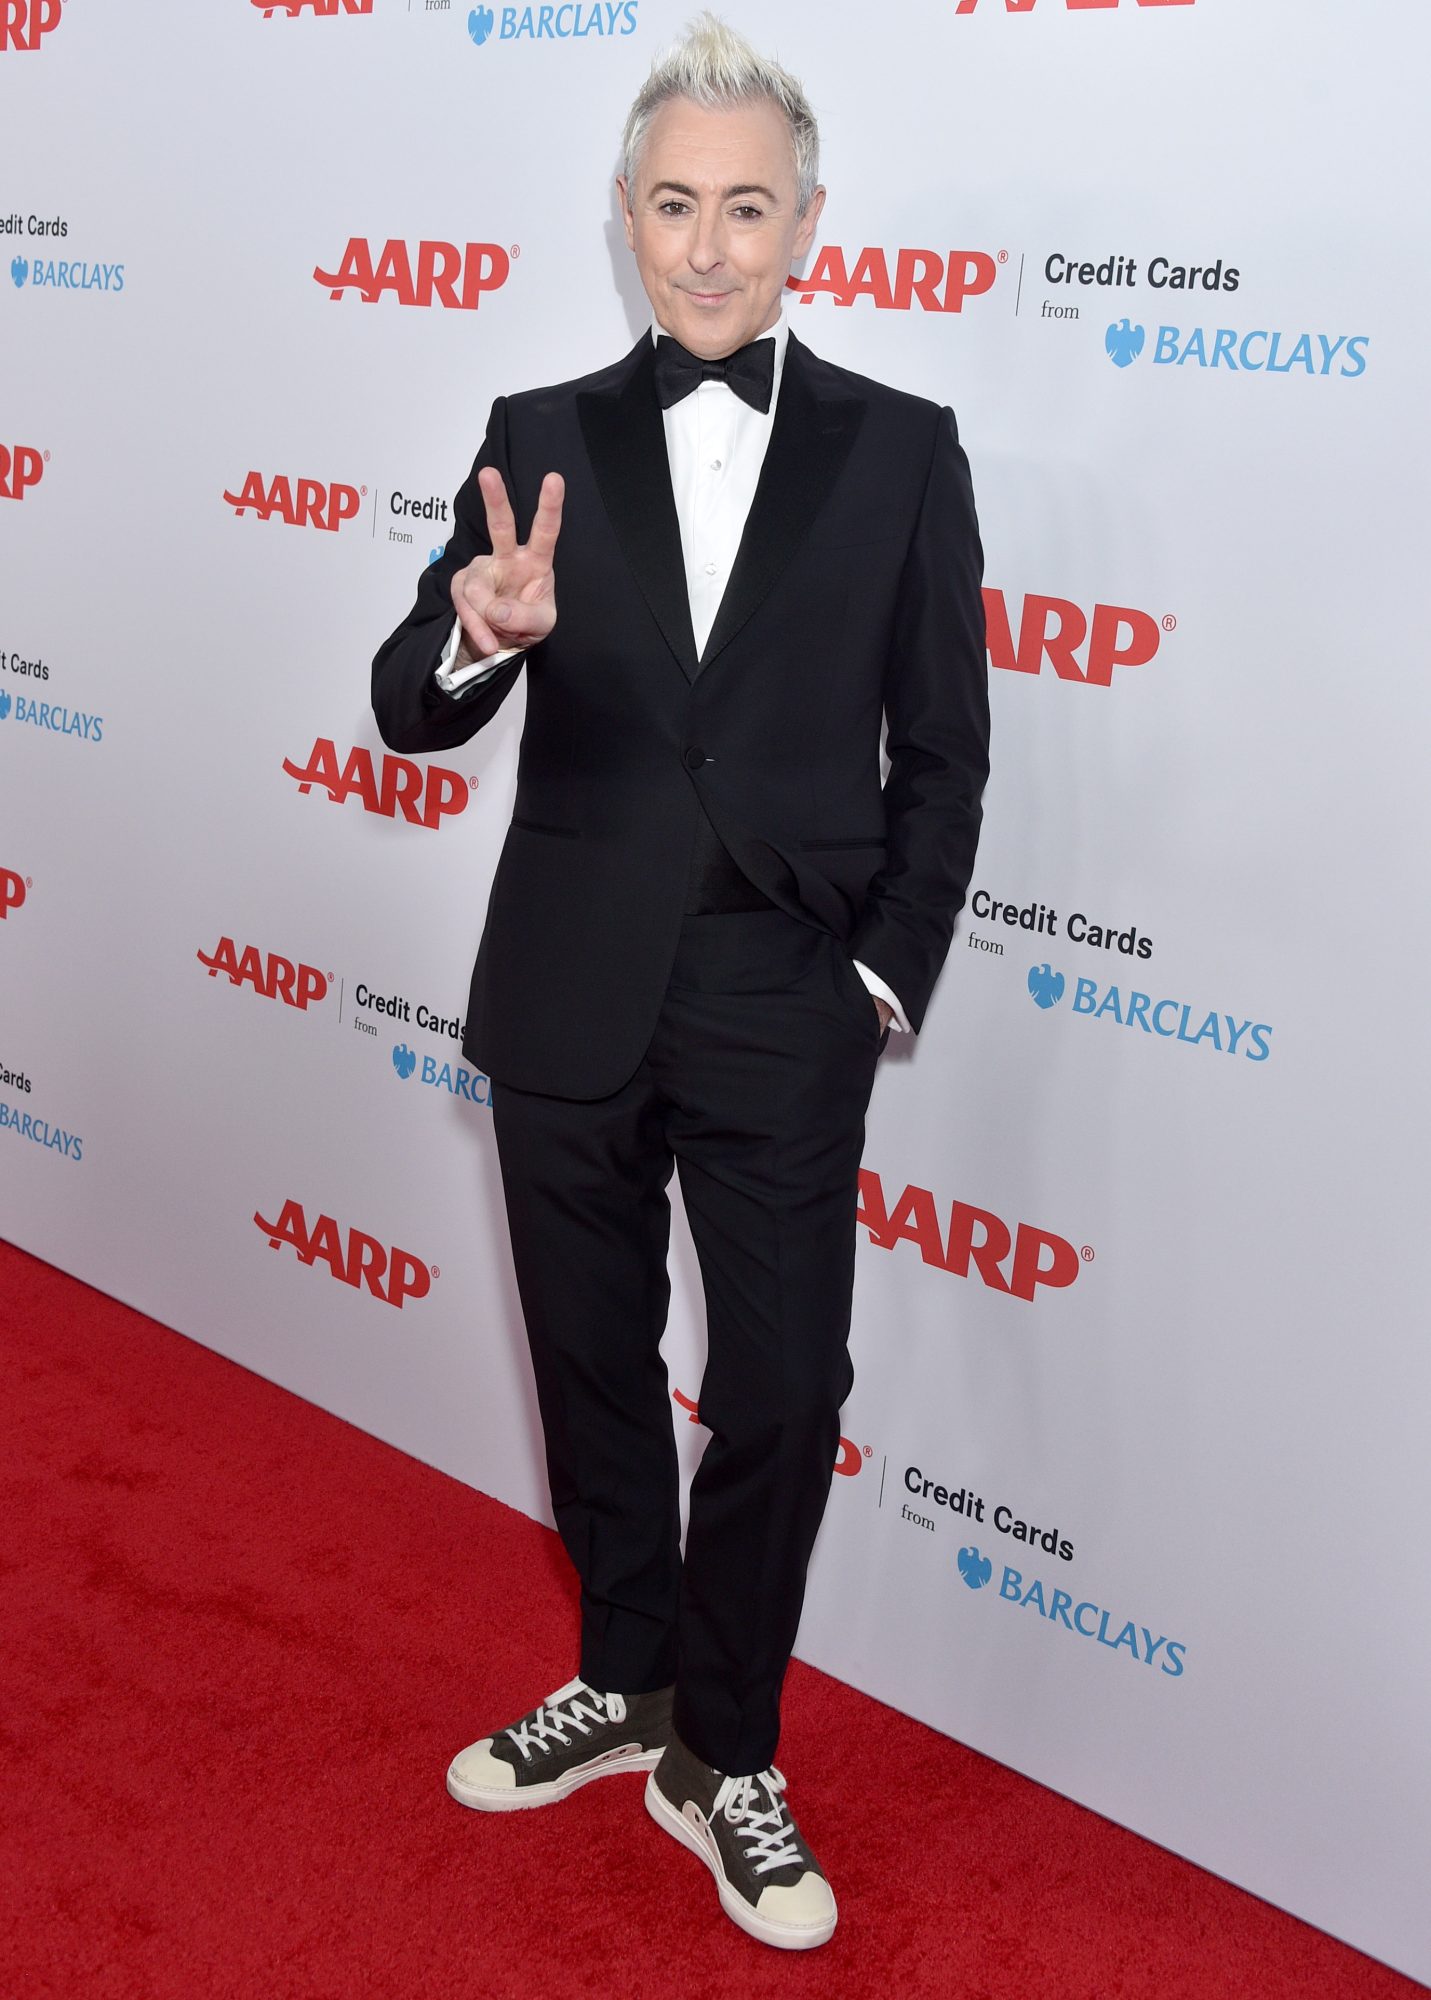 BEVERLY HILLS, CALIFORNIA - JANUARY 28: Alan Cumming attends the "AARP The Magazine's" 21st Annual Movies For Grownups Awards at Beverly Wilshire, A Four Seasons Hotel on January 28, 2023 in Beverly Hills, California. (Photo by Gregg DeGuire/FilmMagic)